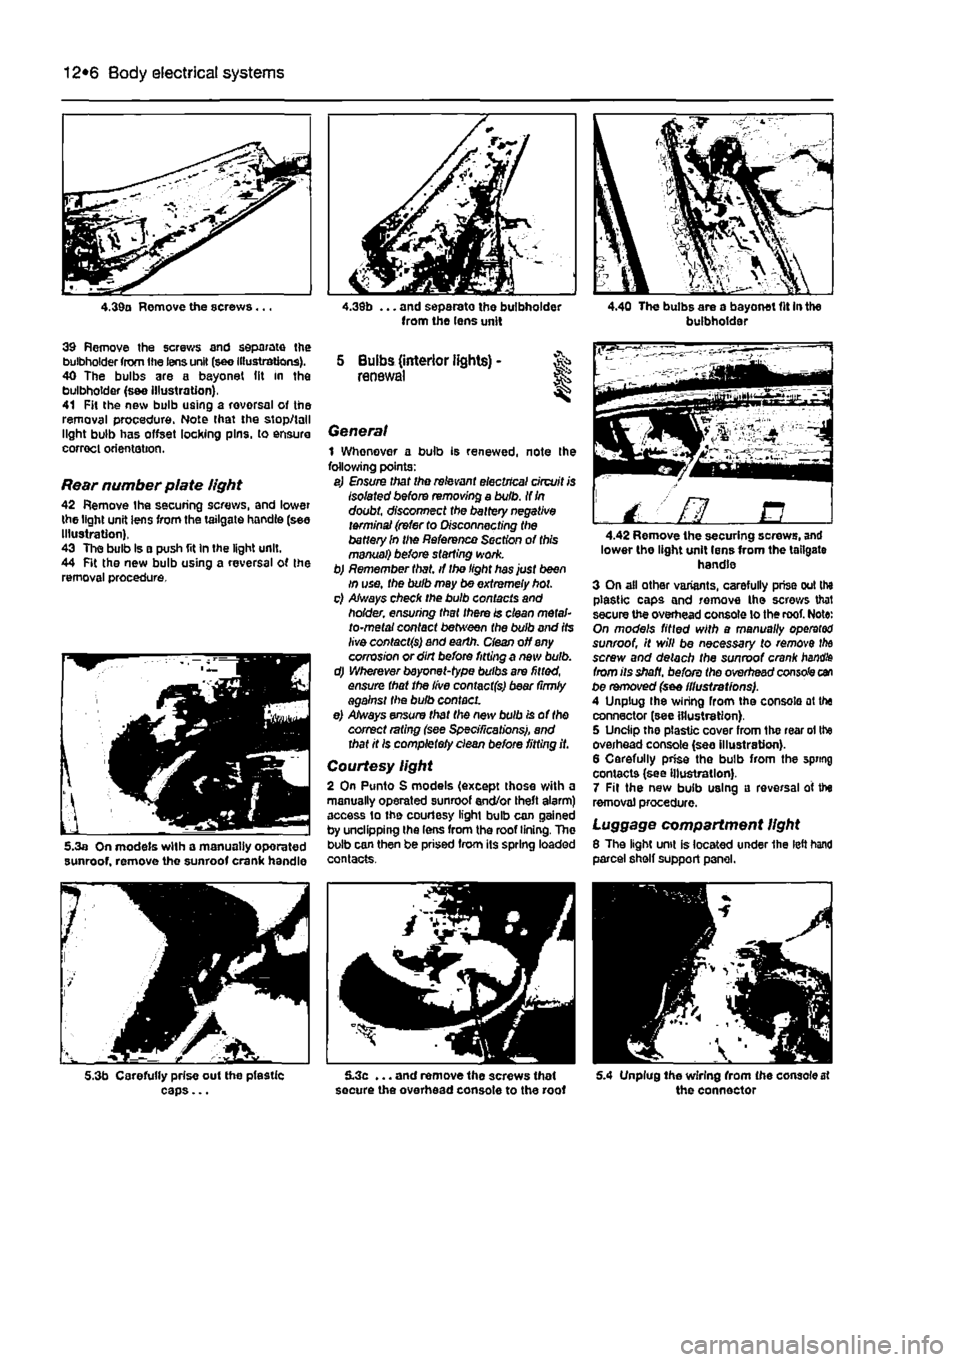 FIAT PUNTO 1998 176 / 1.G Workshop Manual 
12*6 Body electrical systems 
4.39a Remove the screws... 
39 Remove the screws and separate the bulbholder from the lens unit (see Illustrations). 40 The bulbs are a bayonet (it in the bulbholder (s&